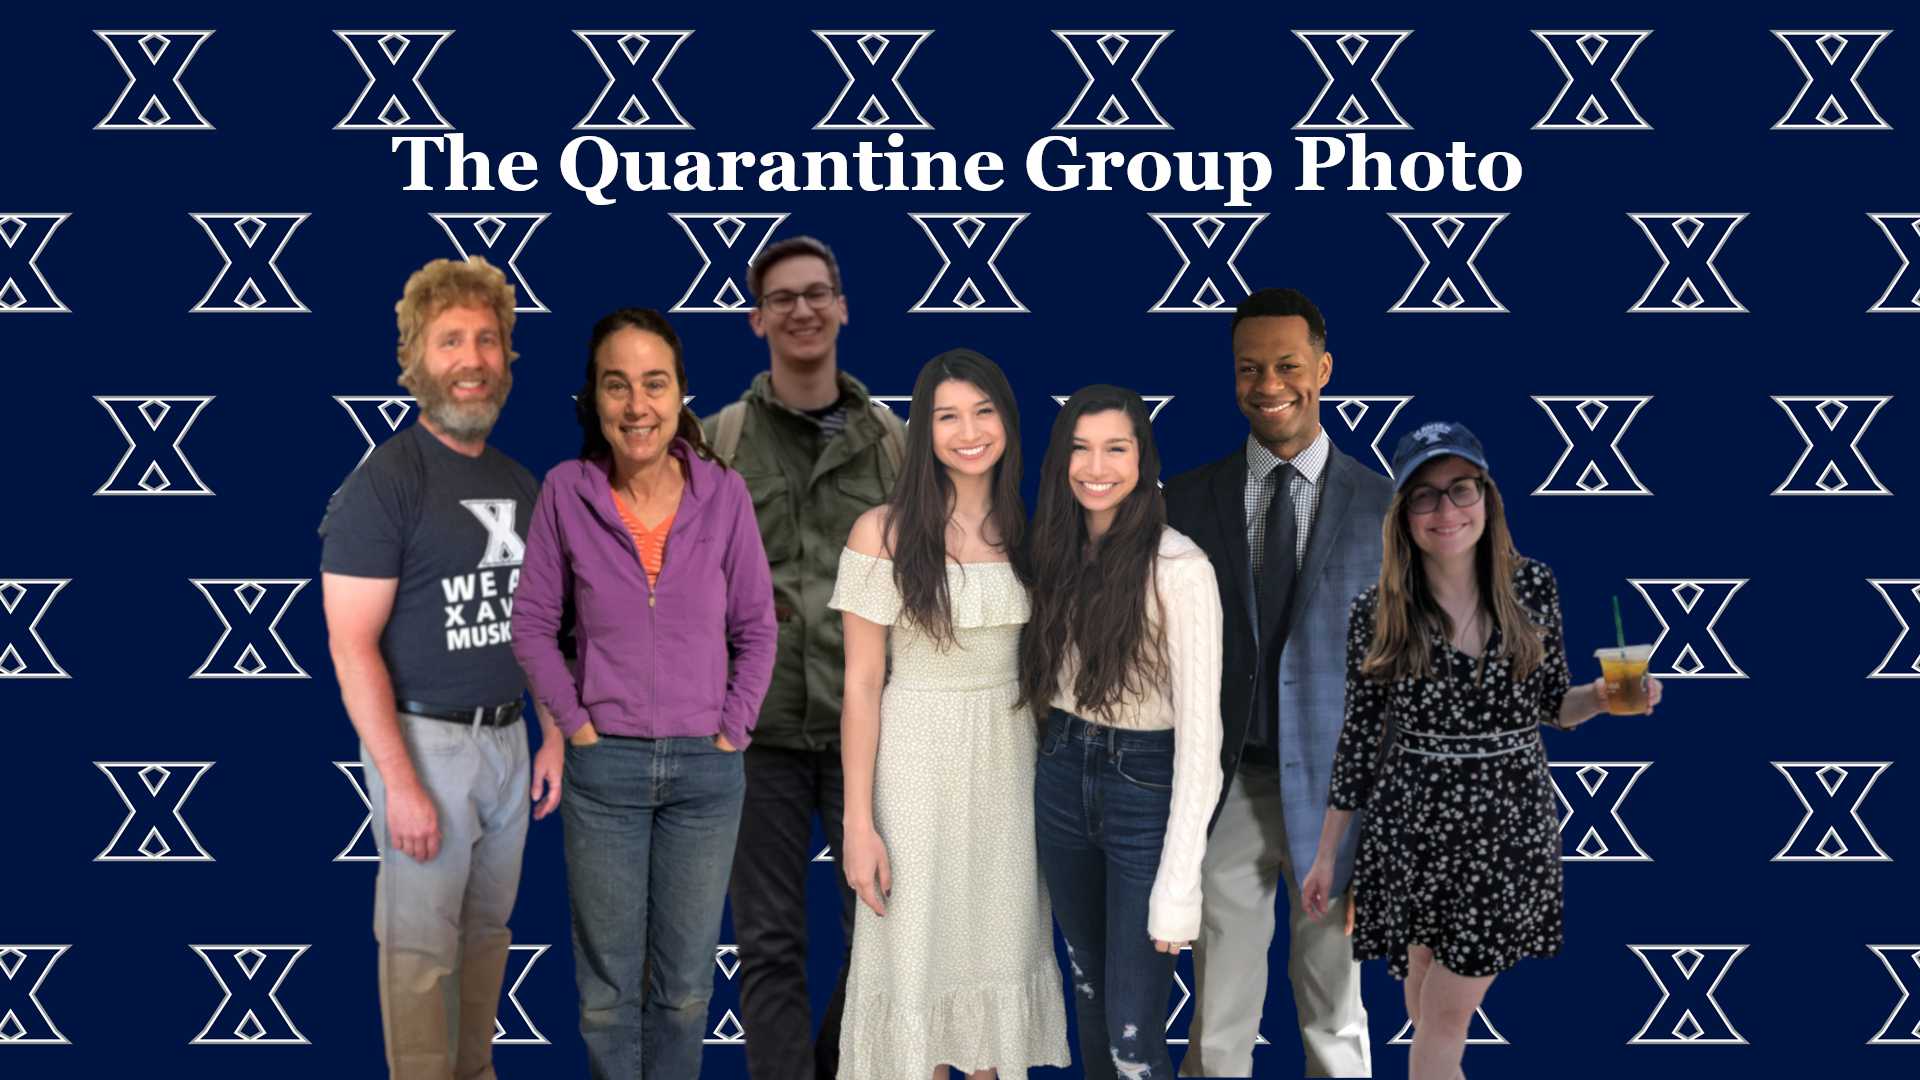 Group of seven people in front of a blue backdrop covered with the Xavier logo